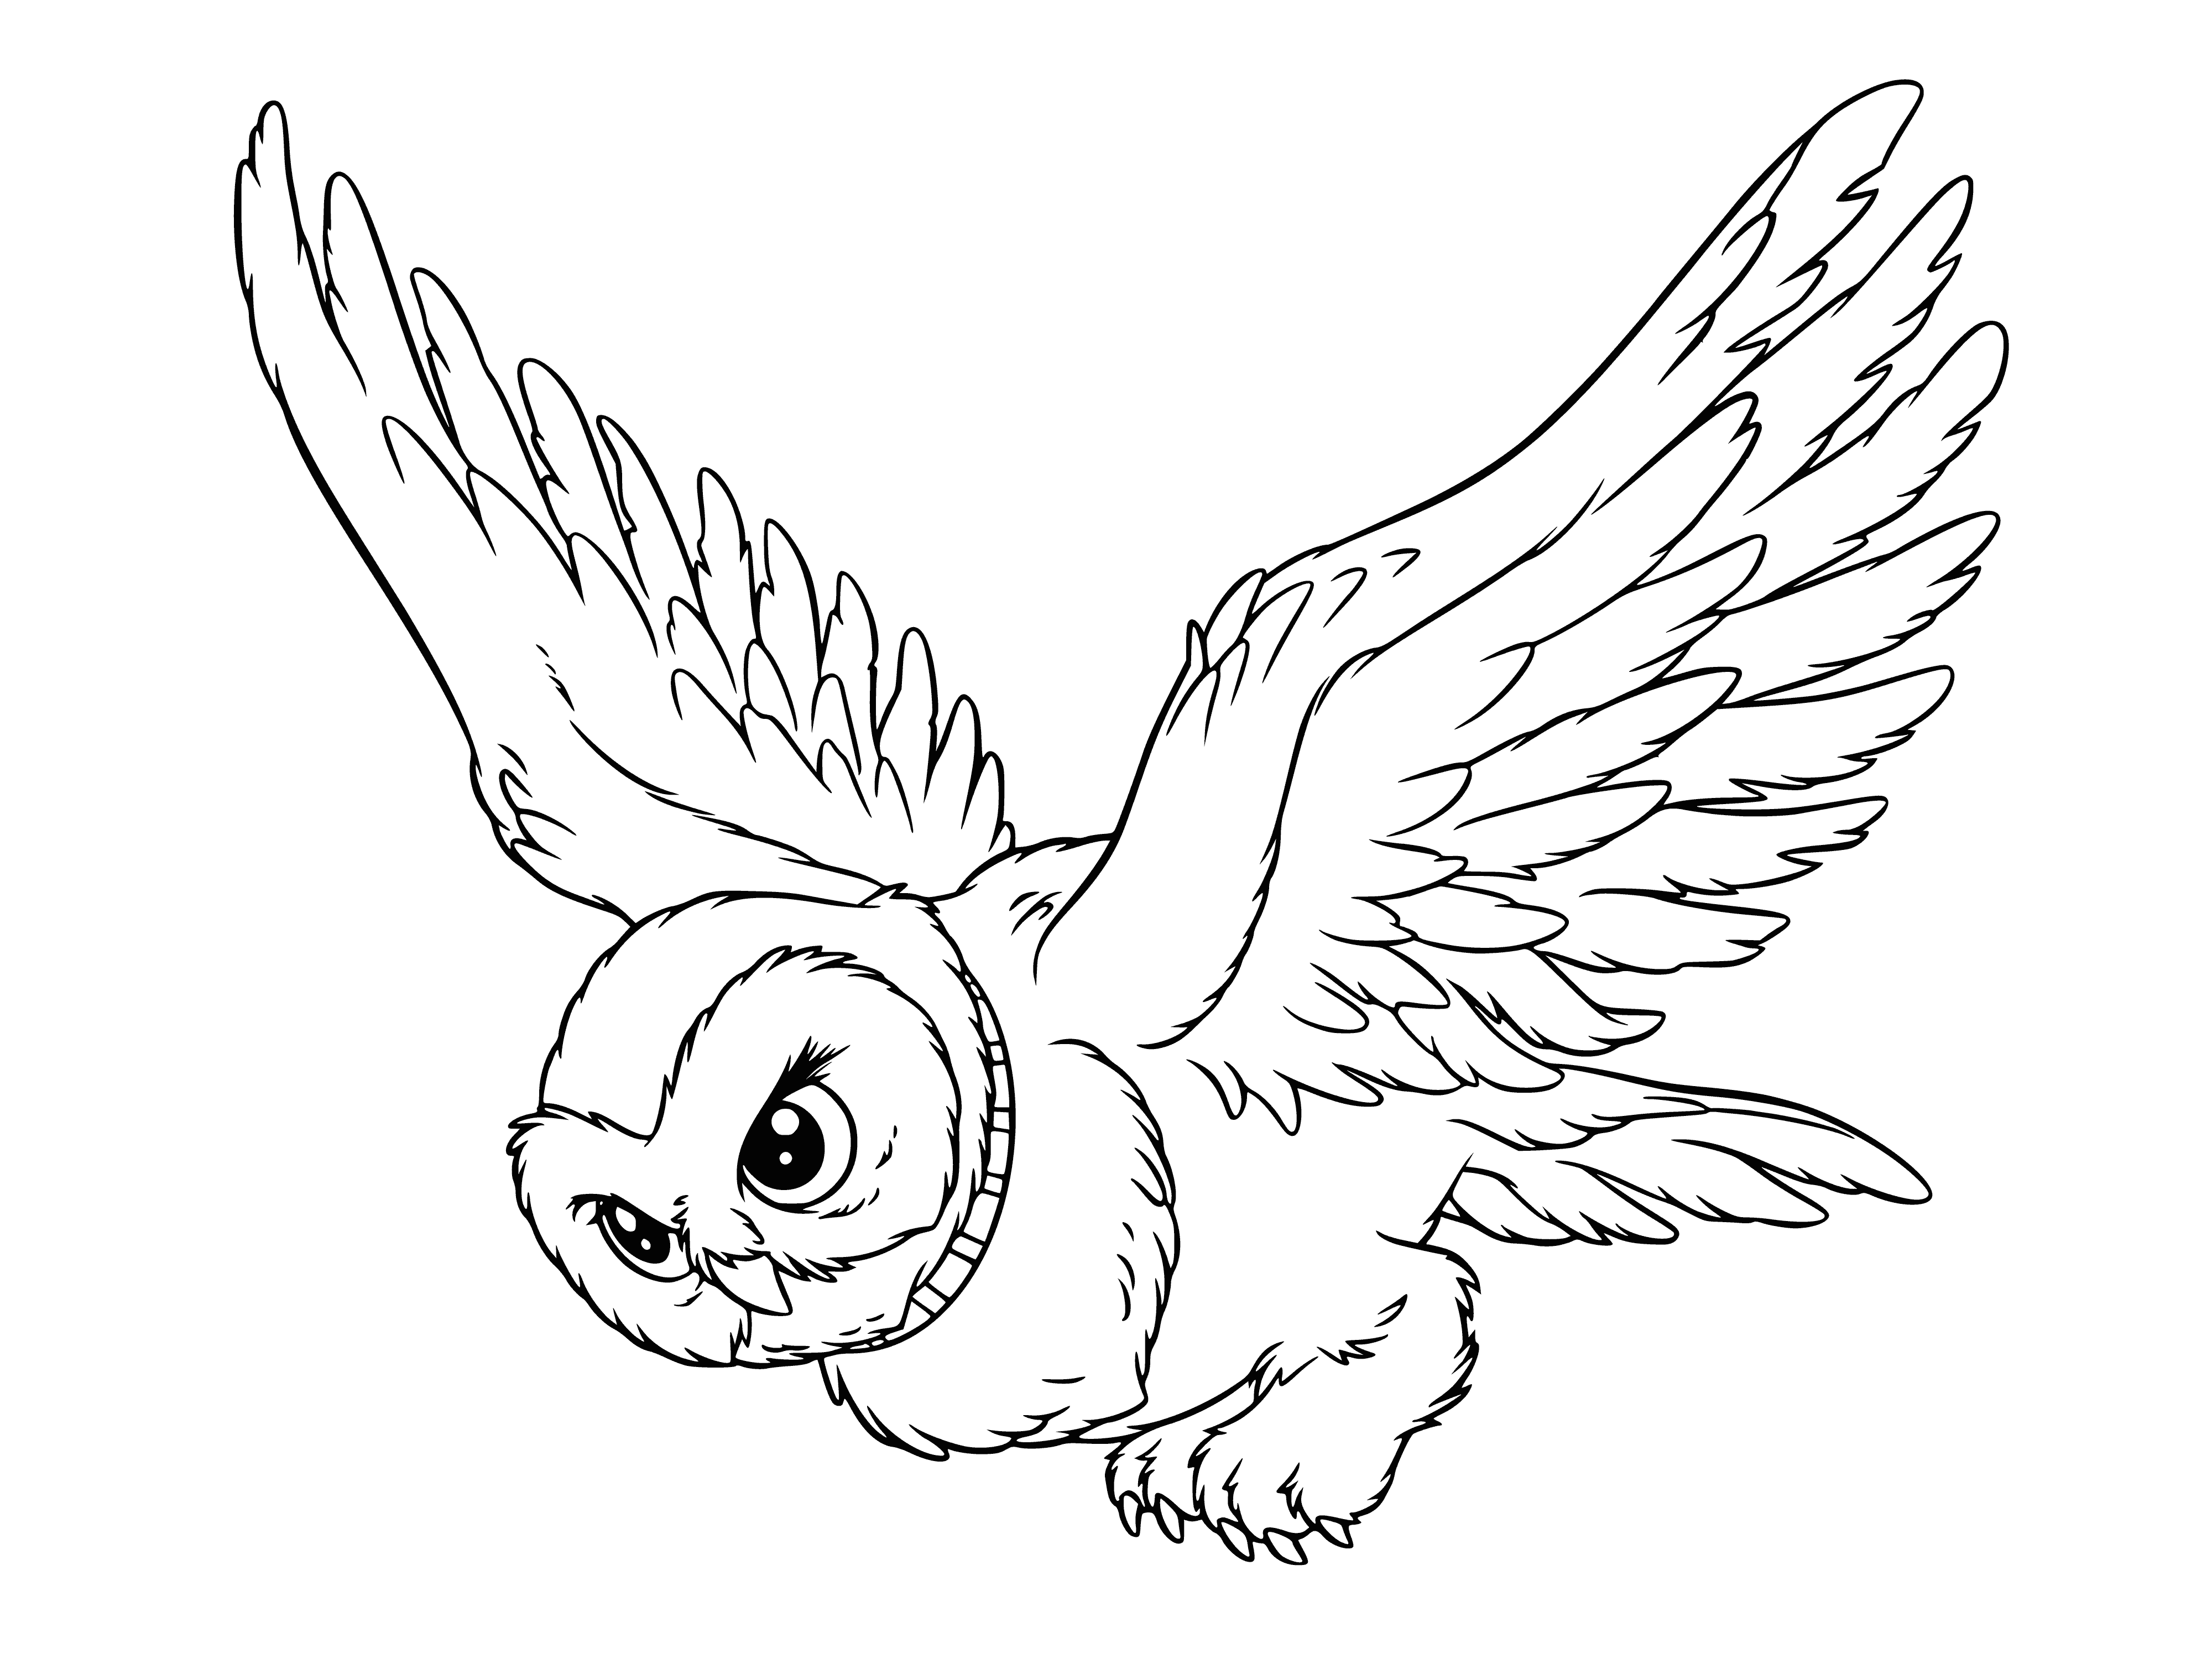 coloring page: Symbol of wisdom, owl perched atop books, signifying knowledge; midnight sky backdrop- this buckle has it all!